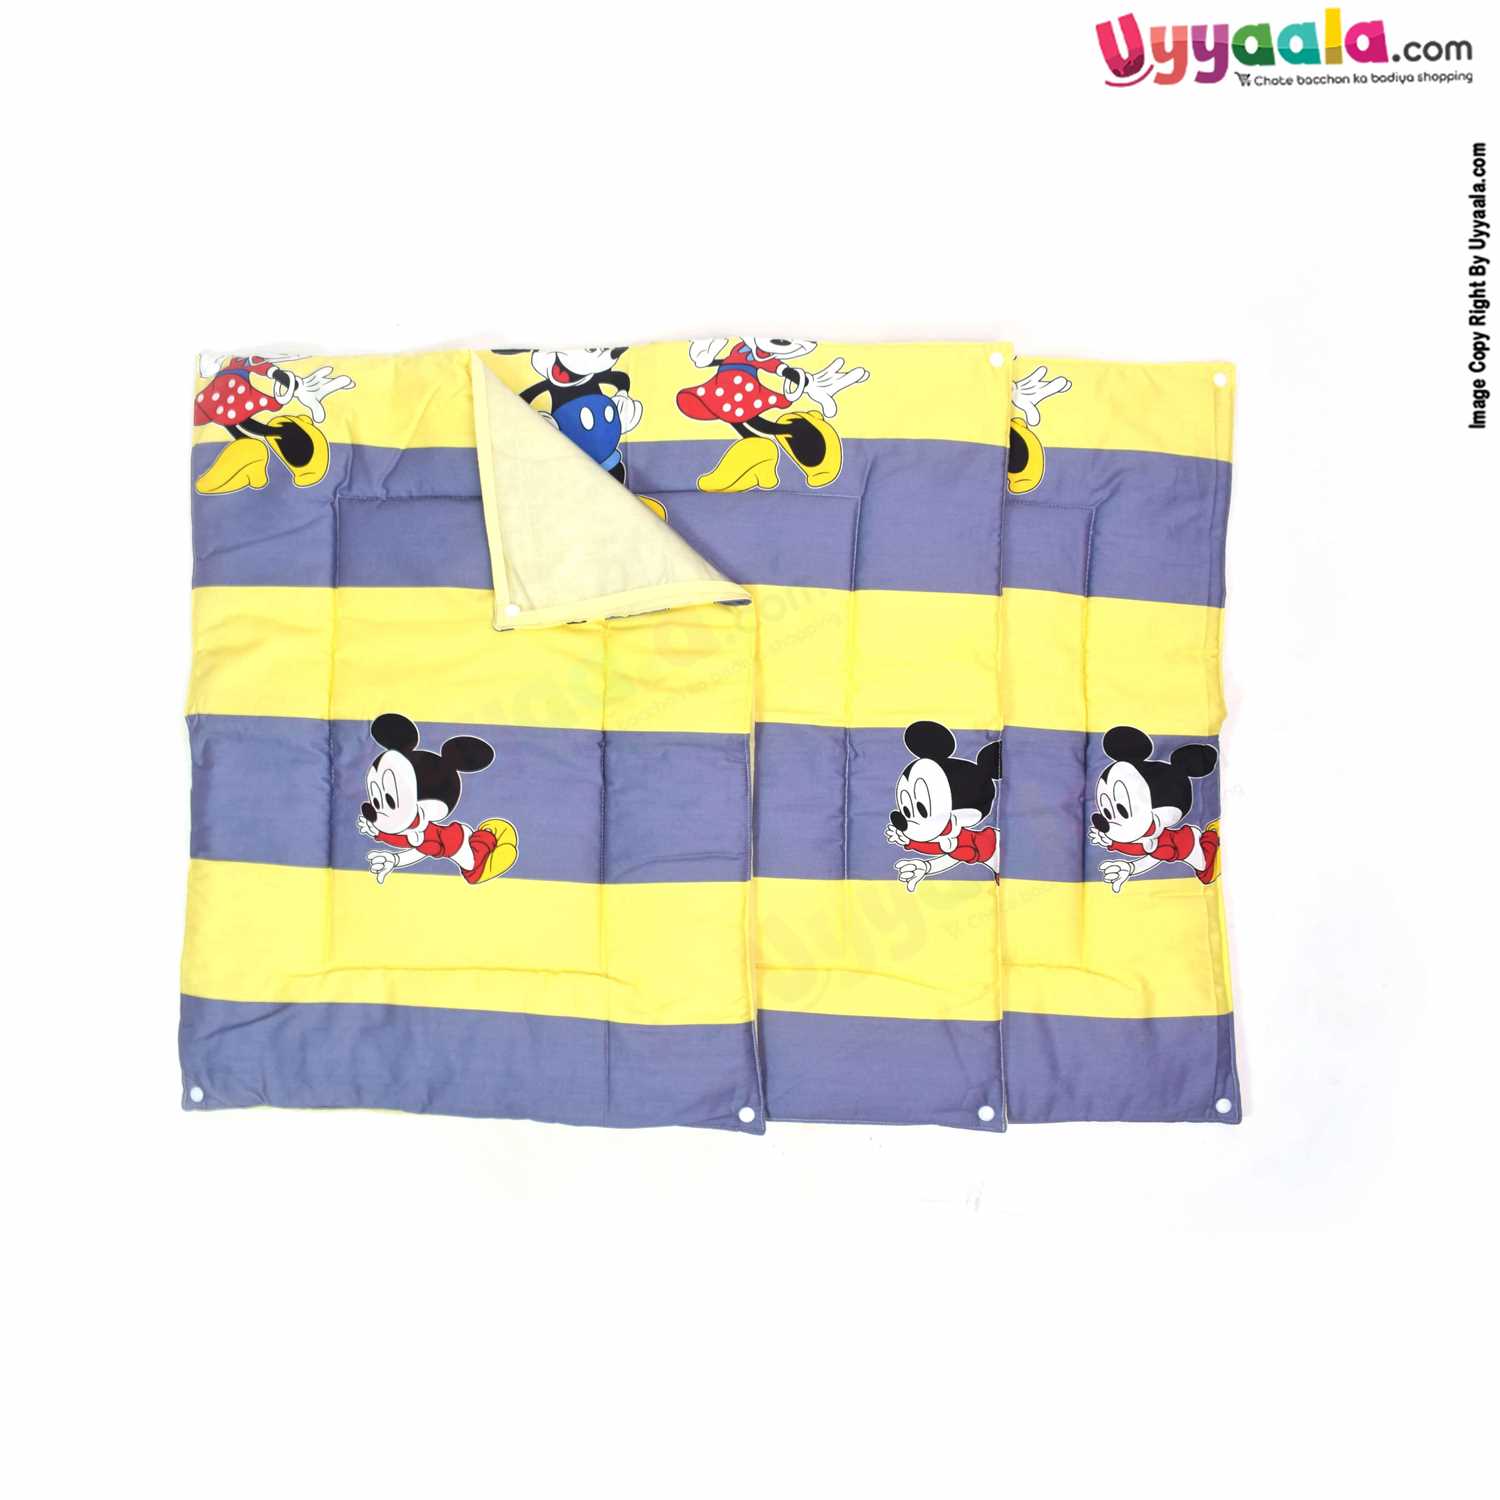 Cotton Foam Cushioned & Plastic detachable Changing Sheets 3+1 Set with Micky Mouse Print,0-6m  - Yellow & Grey